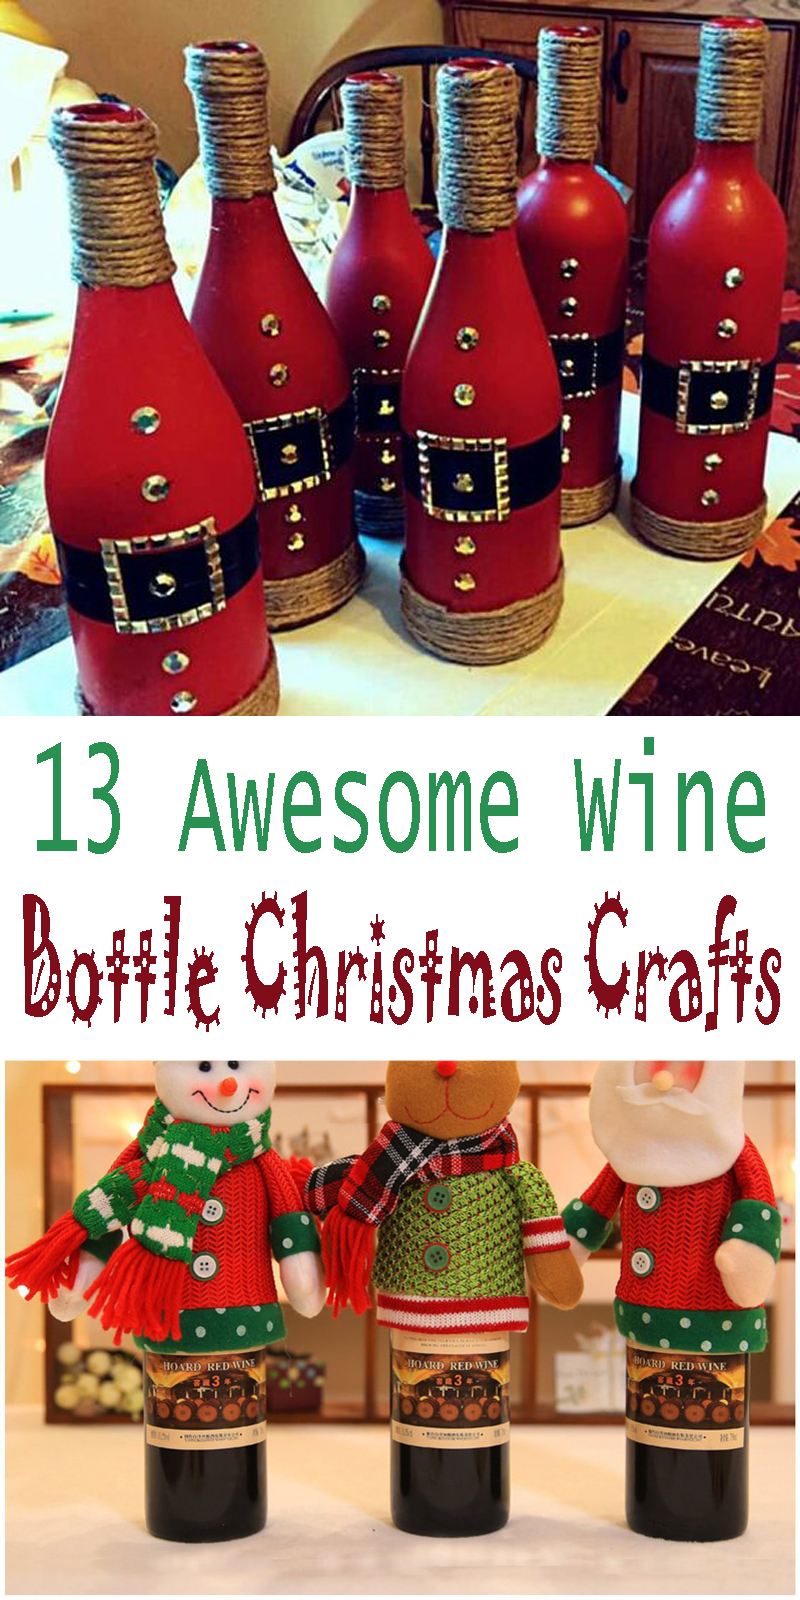 13 Awesome Wine Bottle Christmas Crafts  Holidays Blog For You